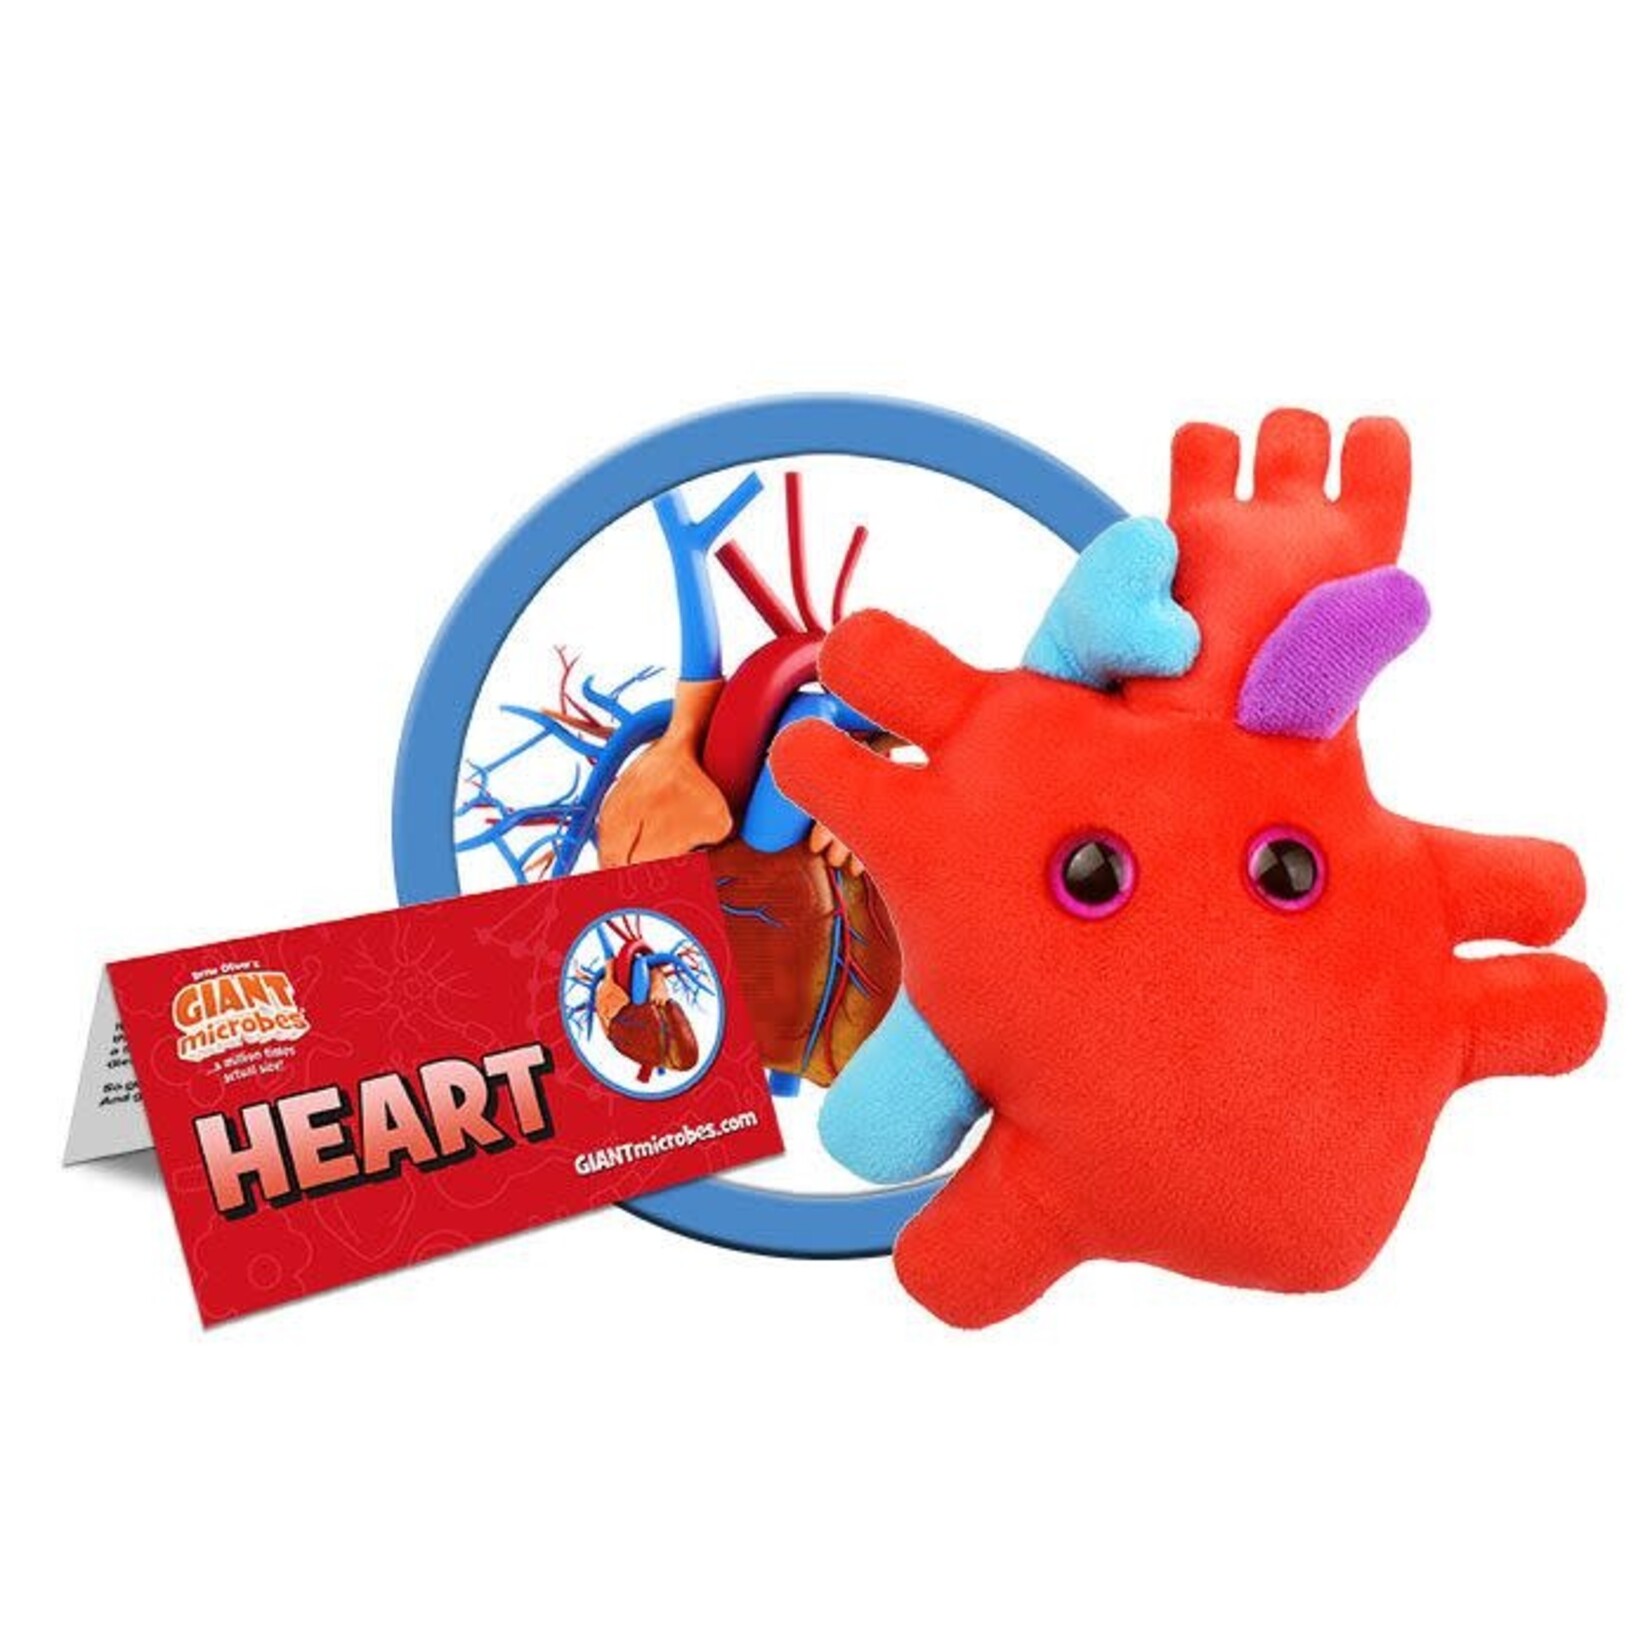 Giant Microbes Heart